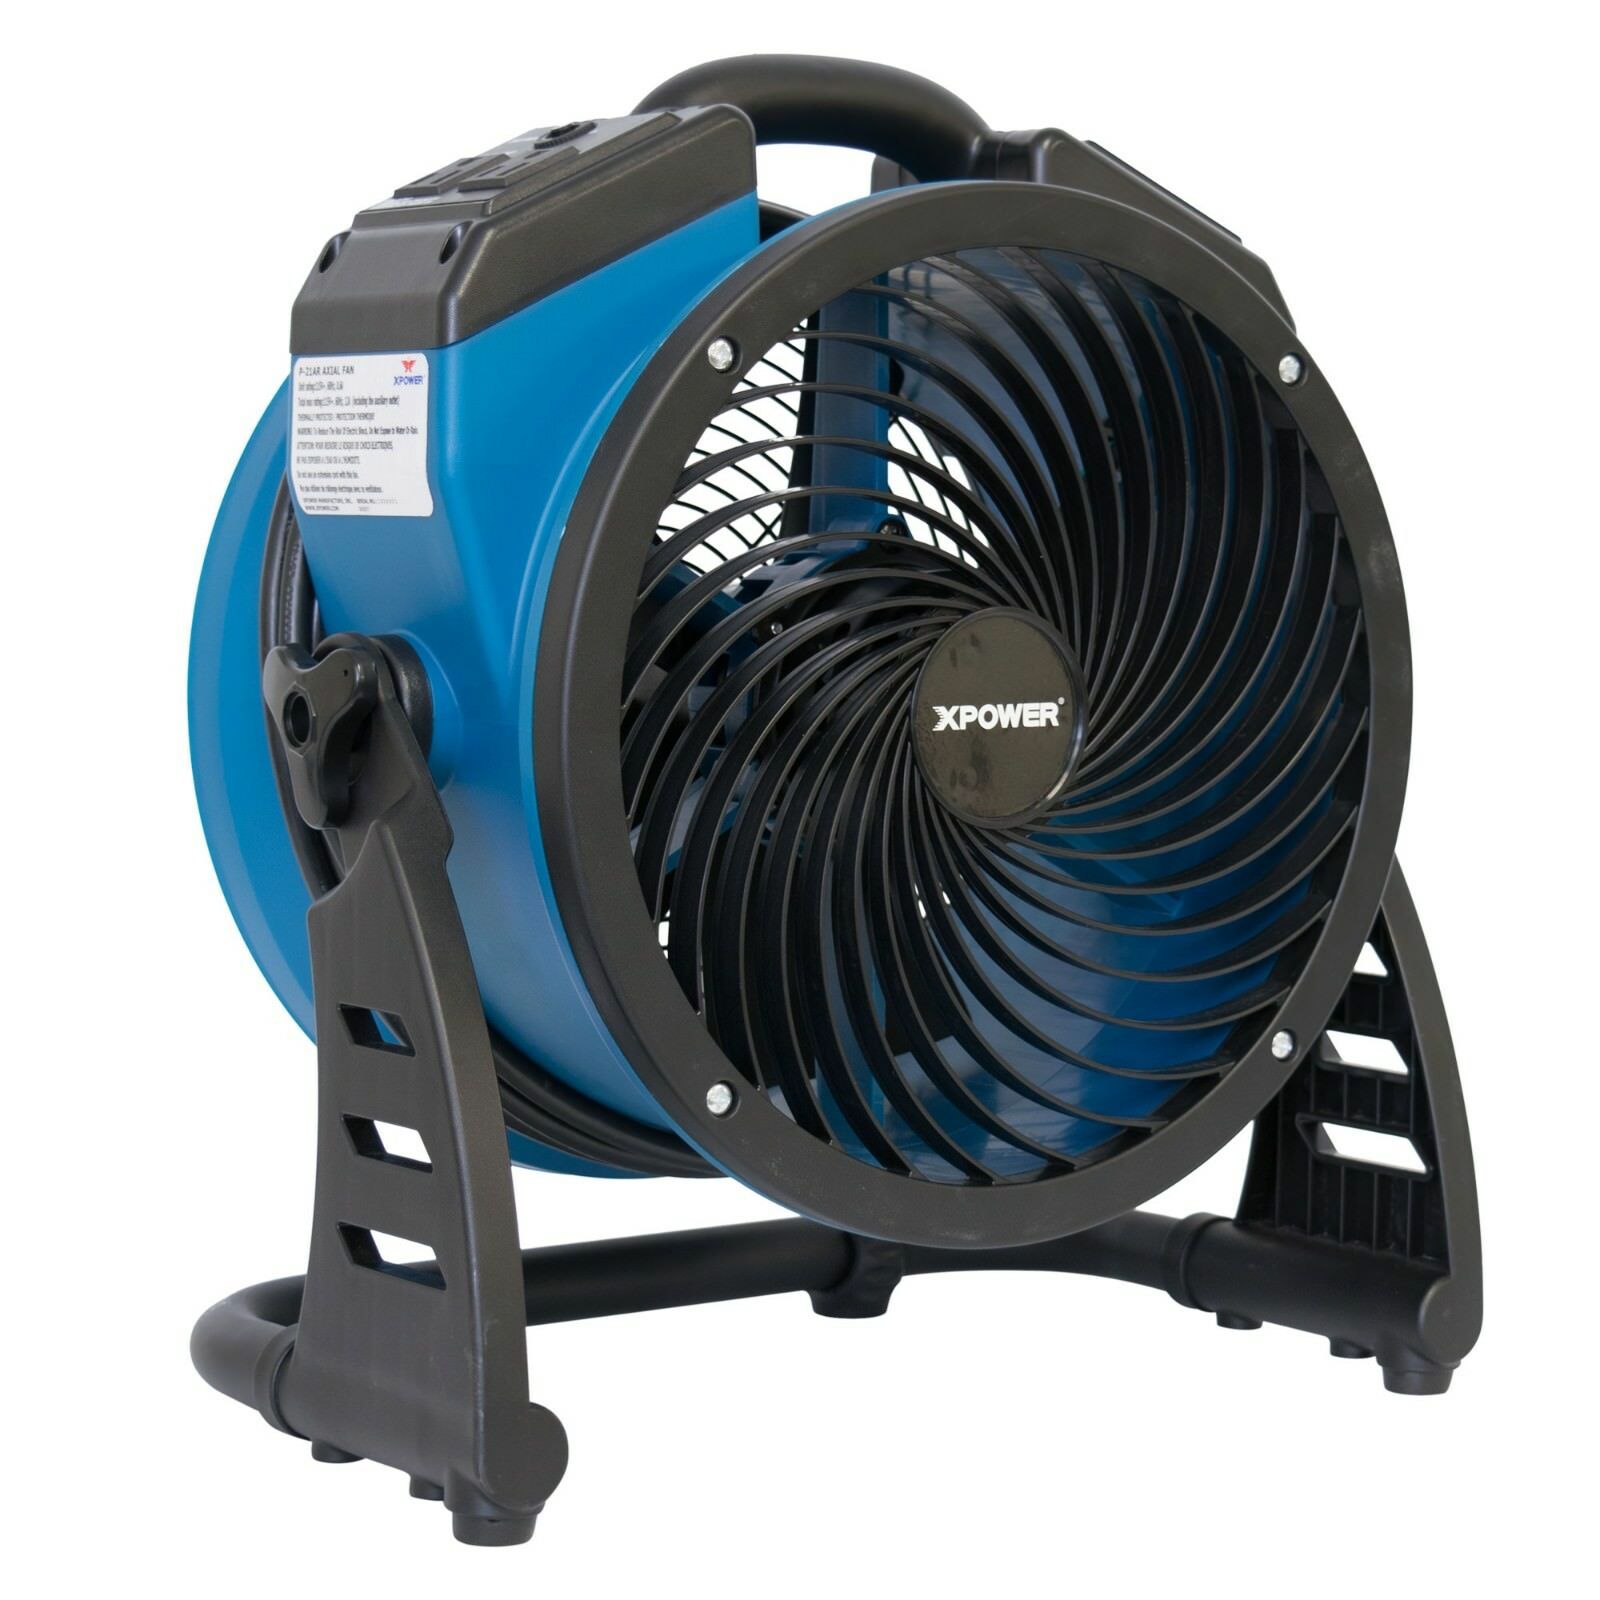 Xpower P-21ar Compact Industrial Axial Fan, Air Mover With Daisy Chain Outlets